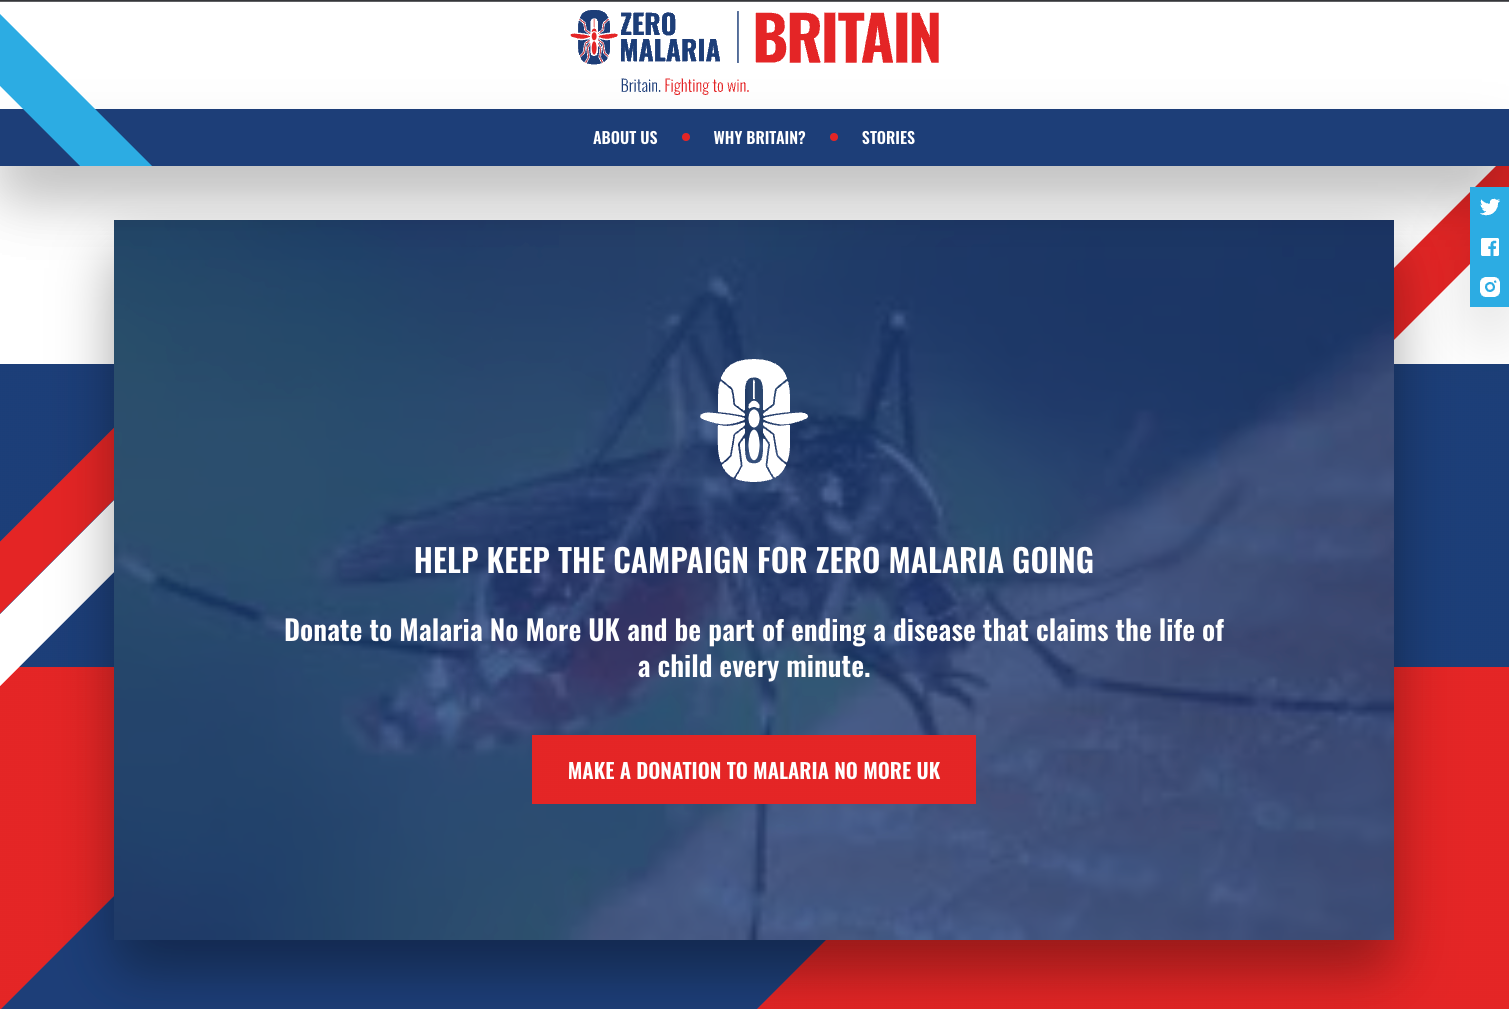 Small page snippet from the Zero Malaria UK website